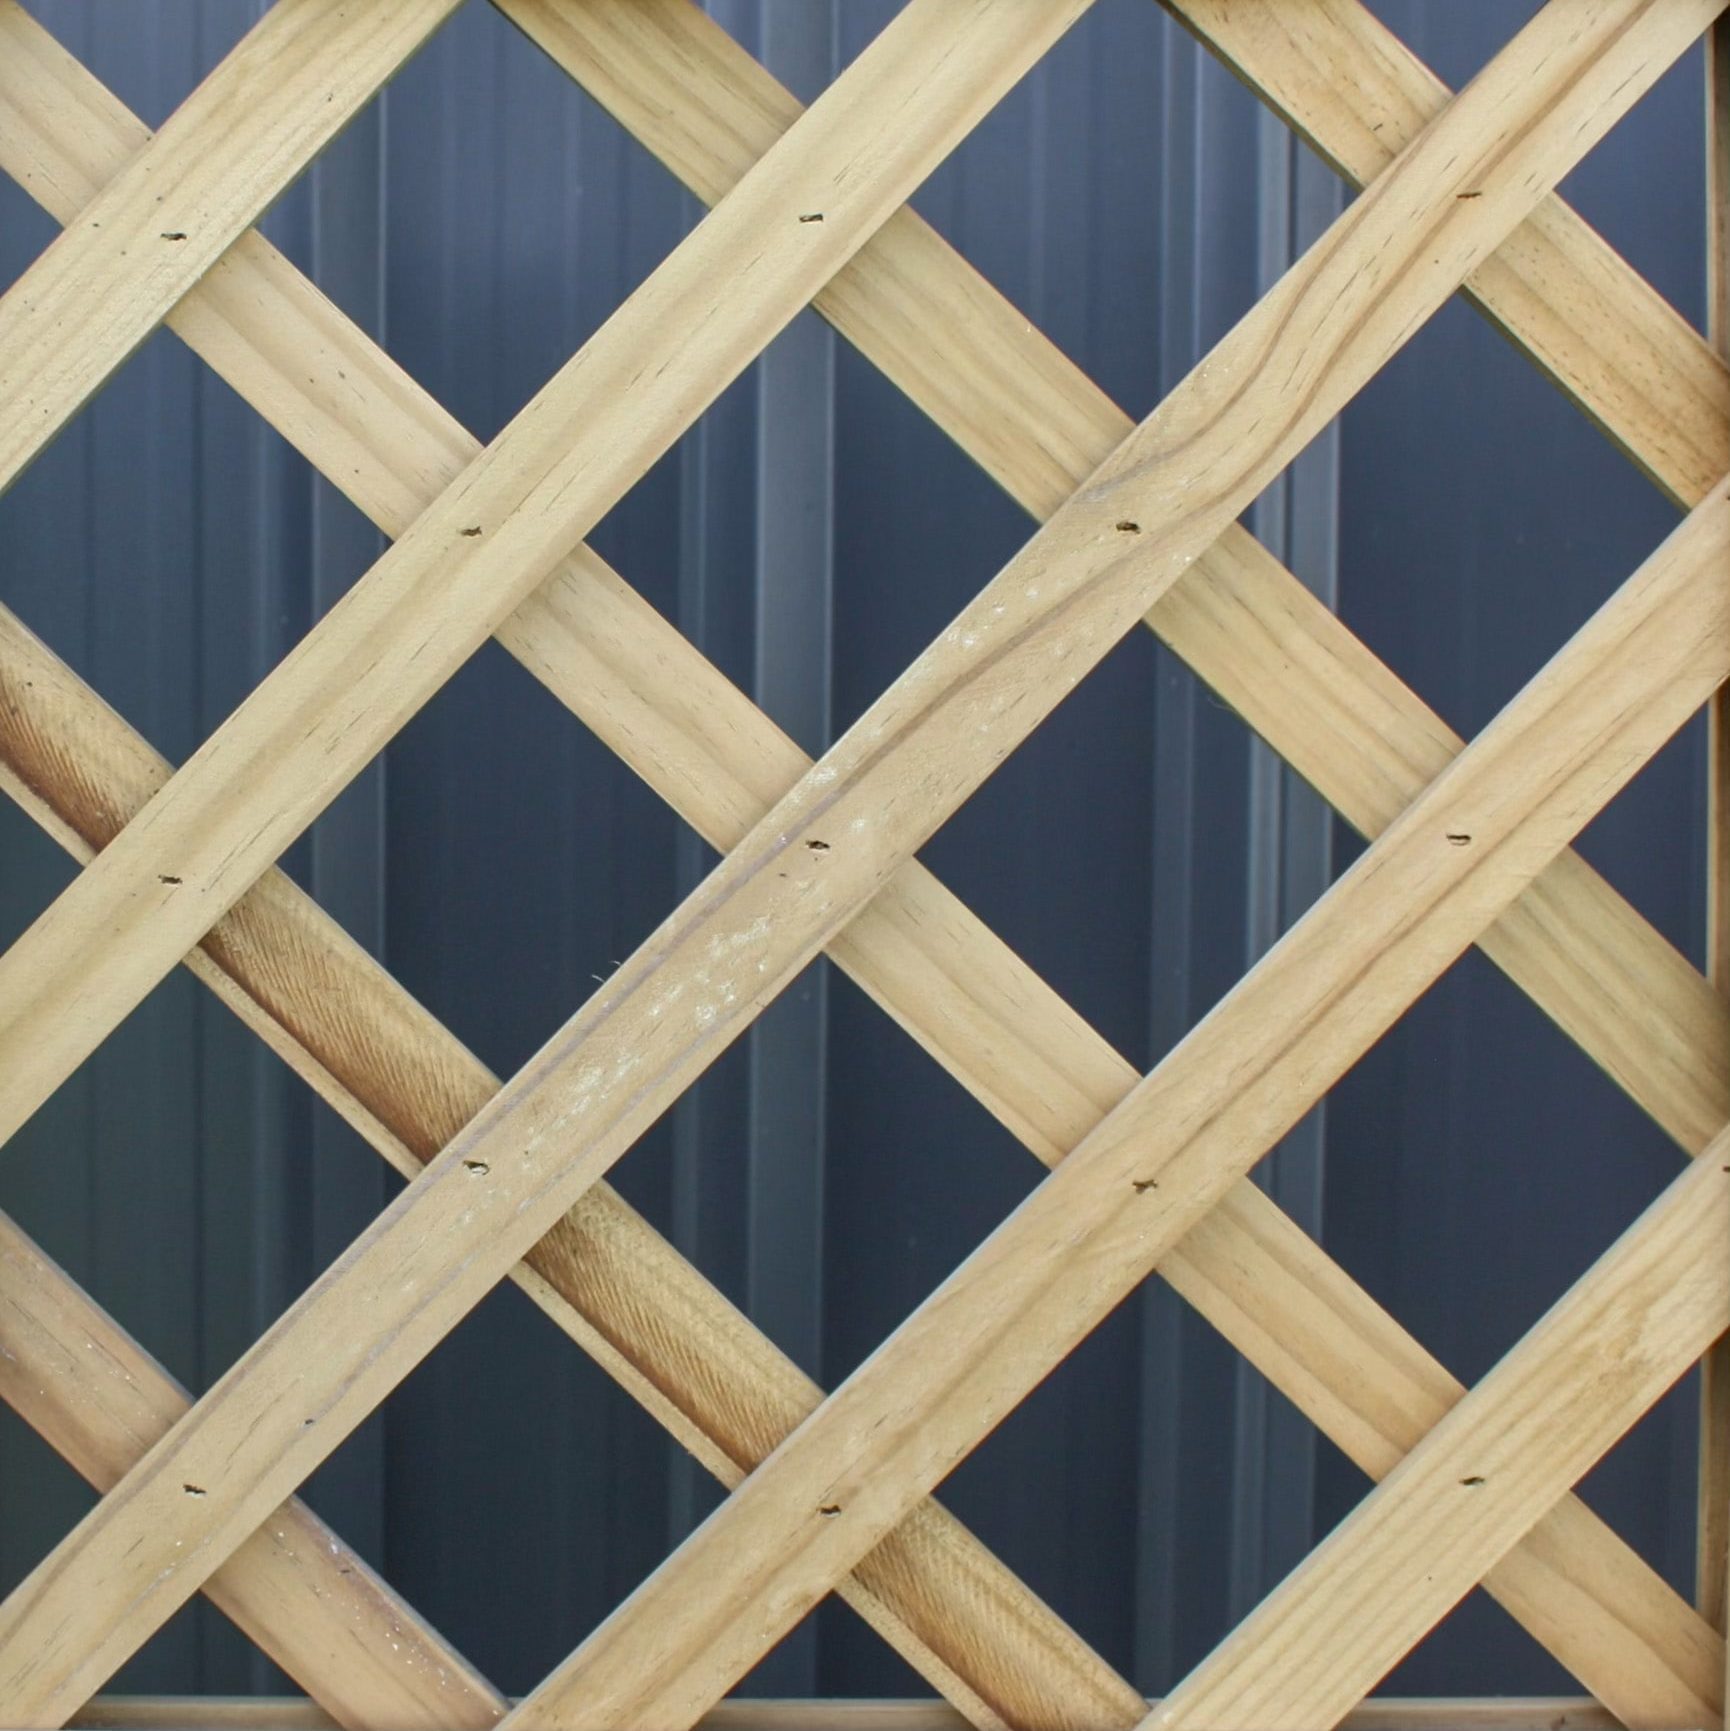 A picture of a 75mm diagonal fence design